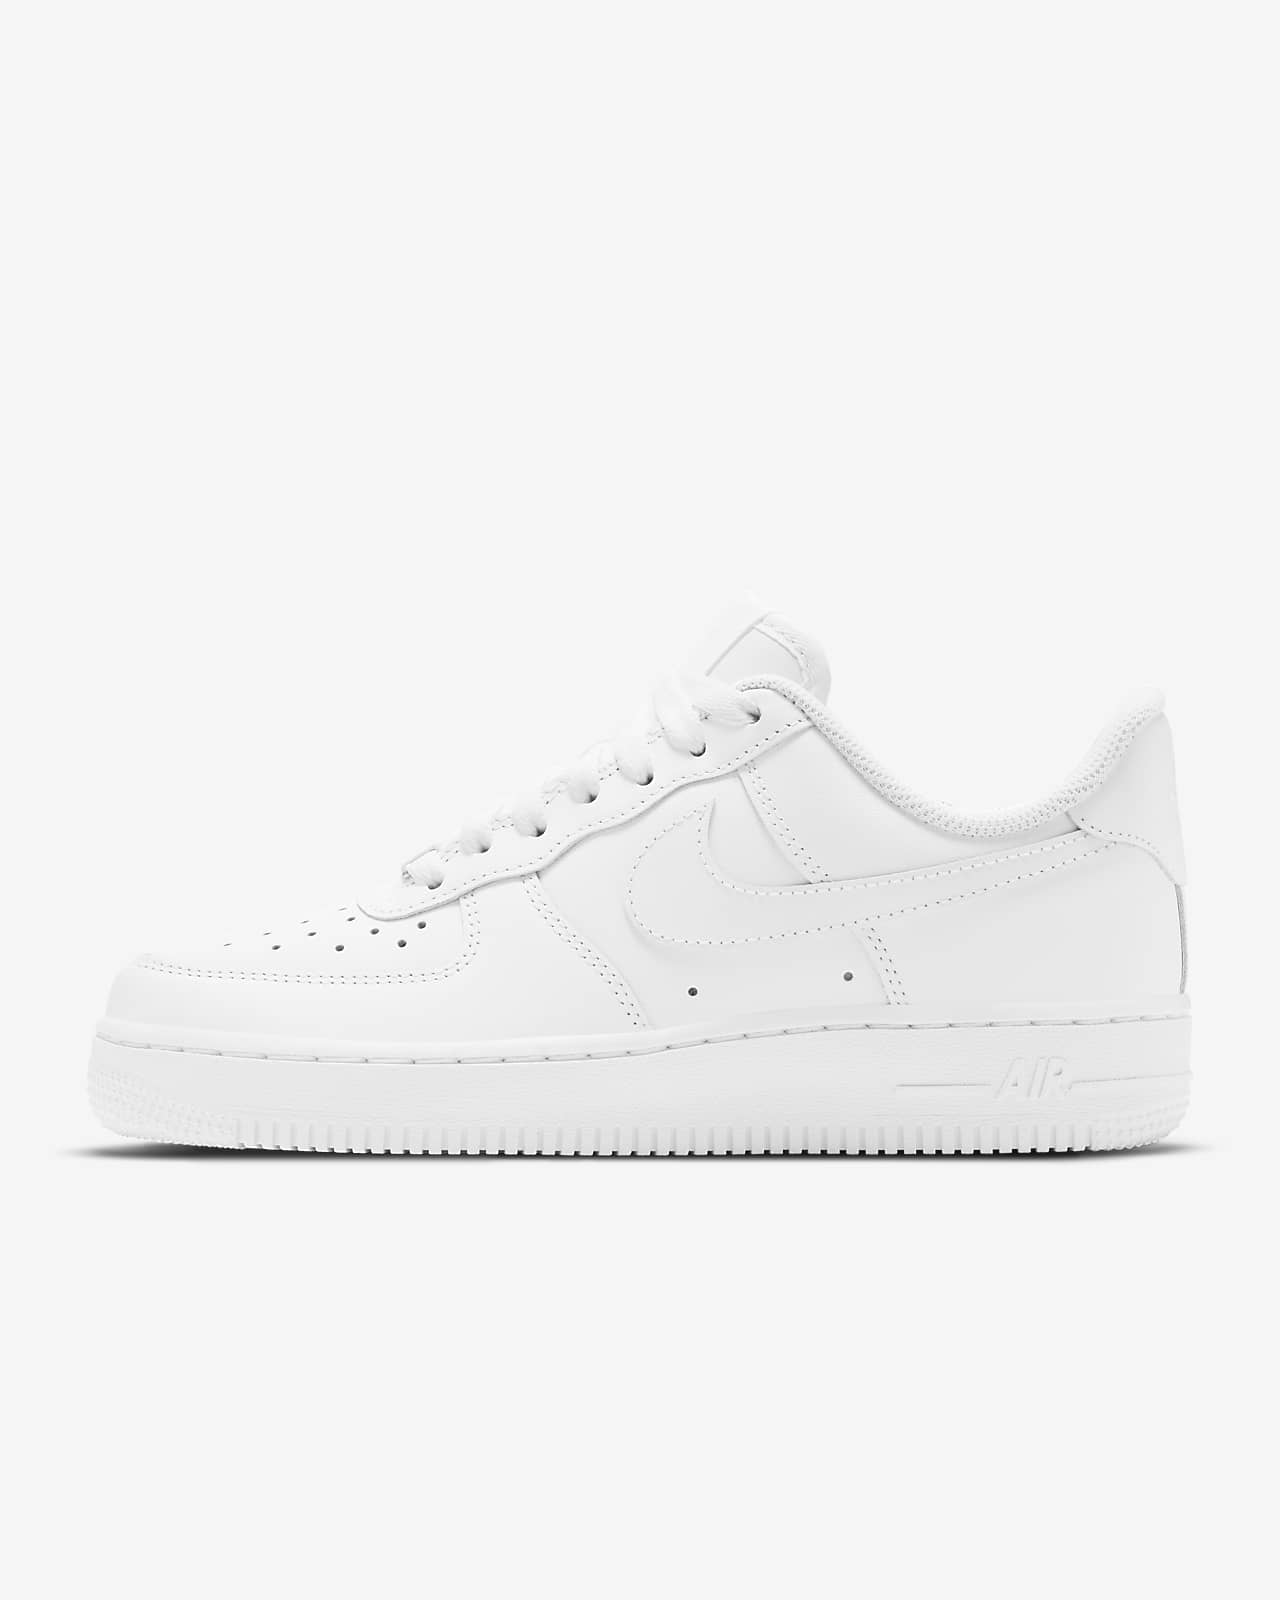 Nike Official Nike Air Force 1 07 Women S Shoe Online Store Mail